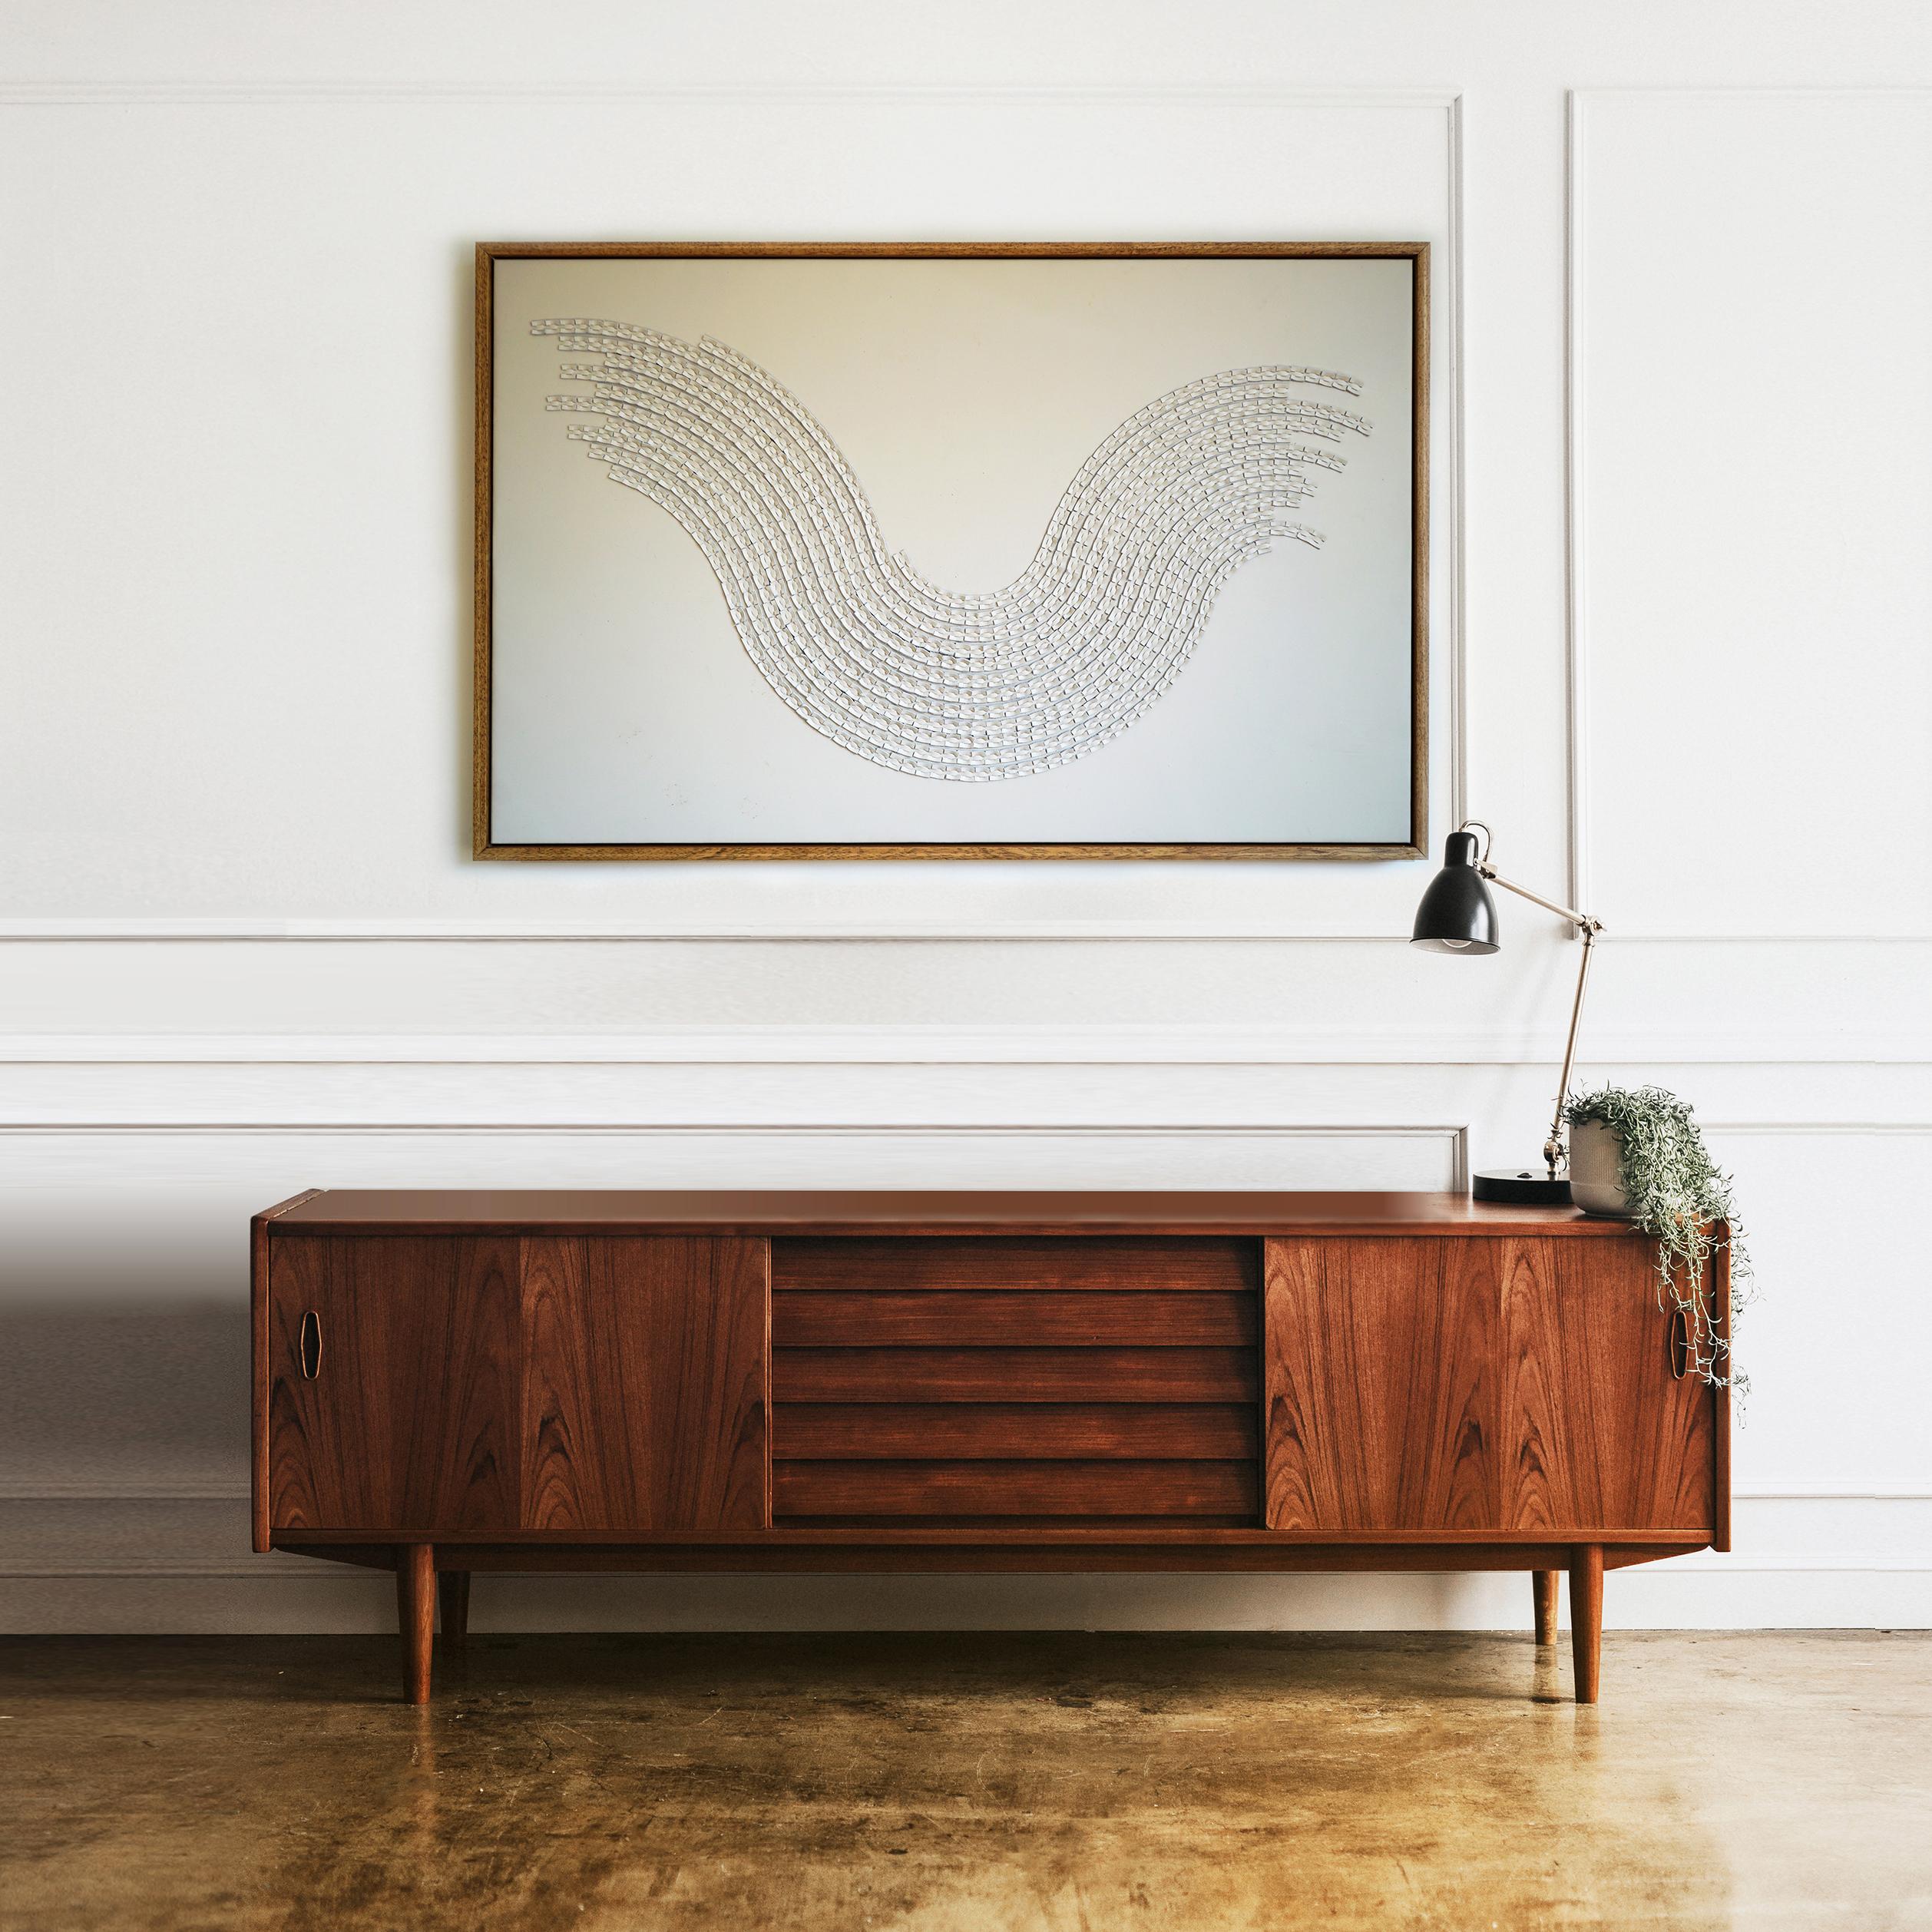 Wave, A Piece of 3D Sculptural Cream Leather Wall Art In New Condition For Sale In Margate, GB